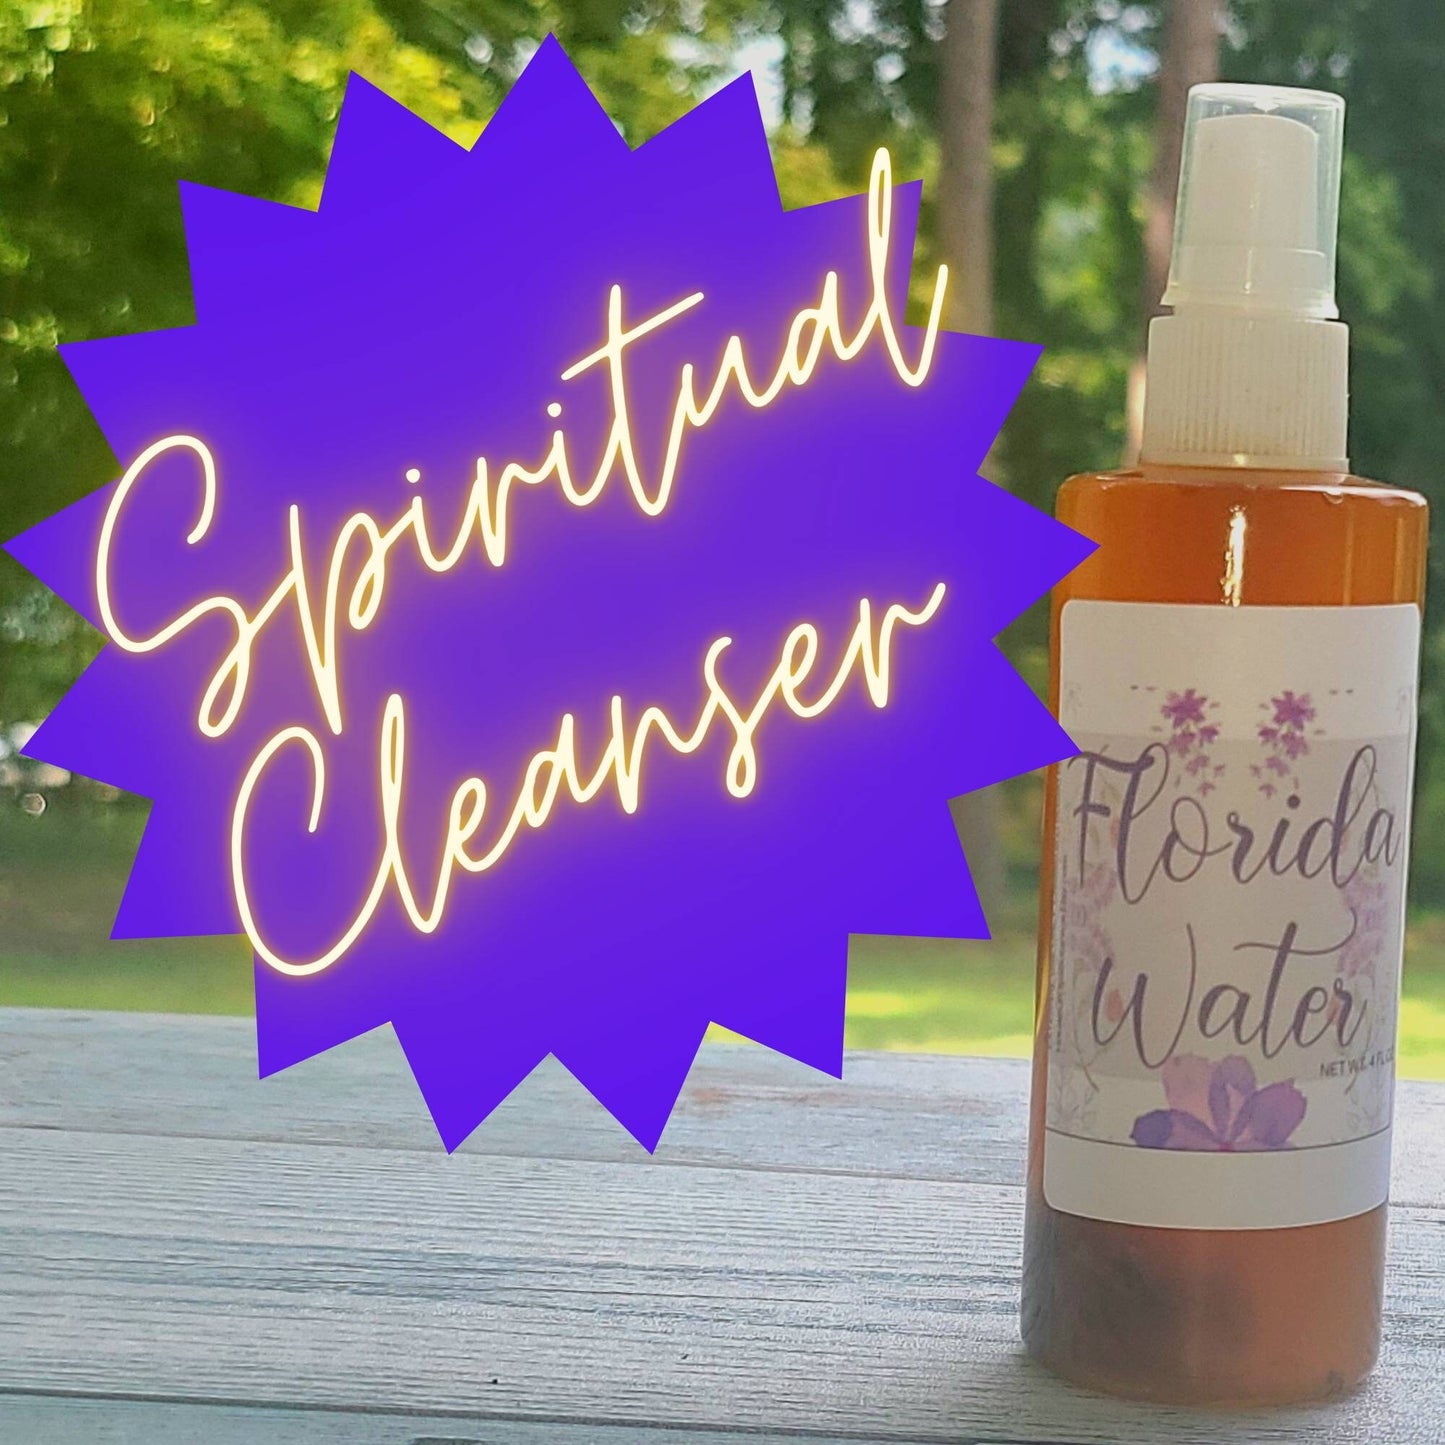 Florida Water, Cleansing Highly, Concentrated Spiritual, 4 oz, Fine Mist, Spray Bottle, Ritual Spell Magick